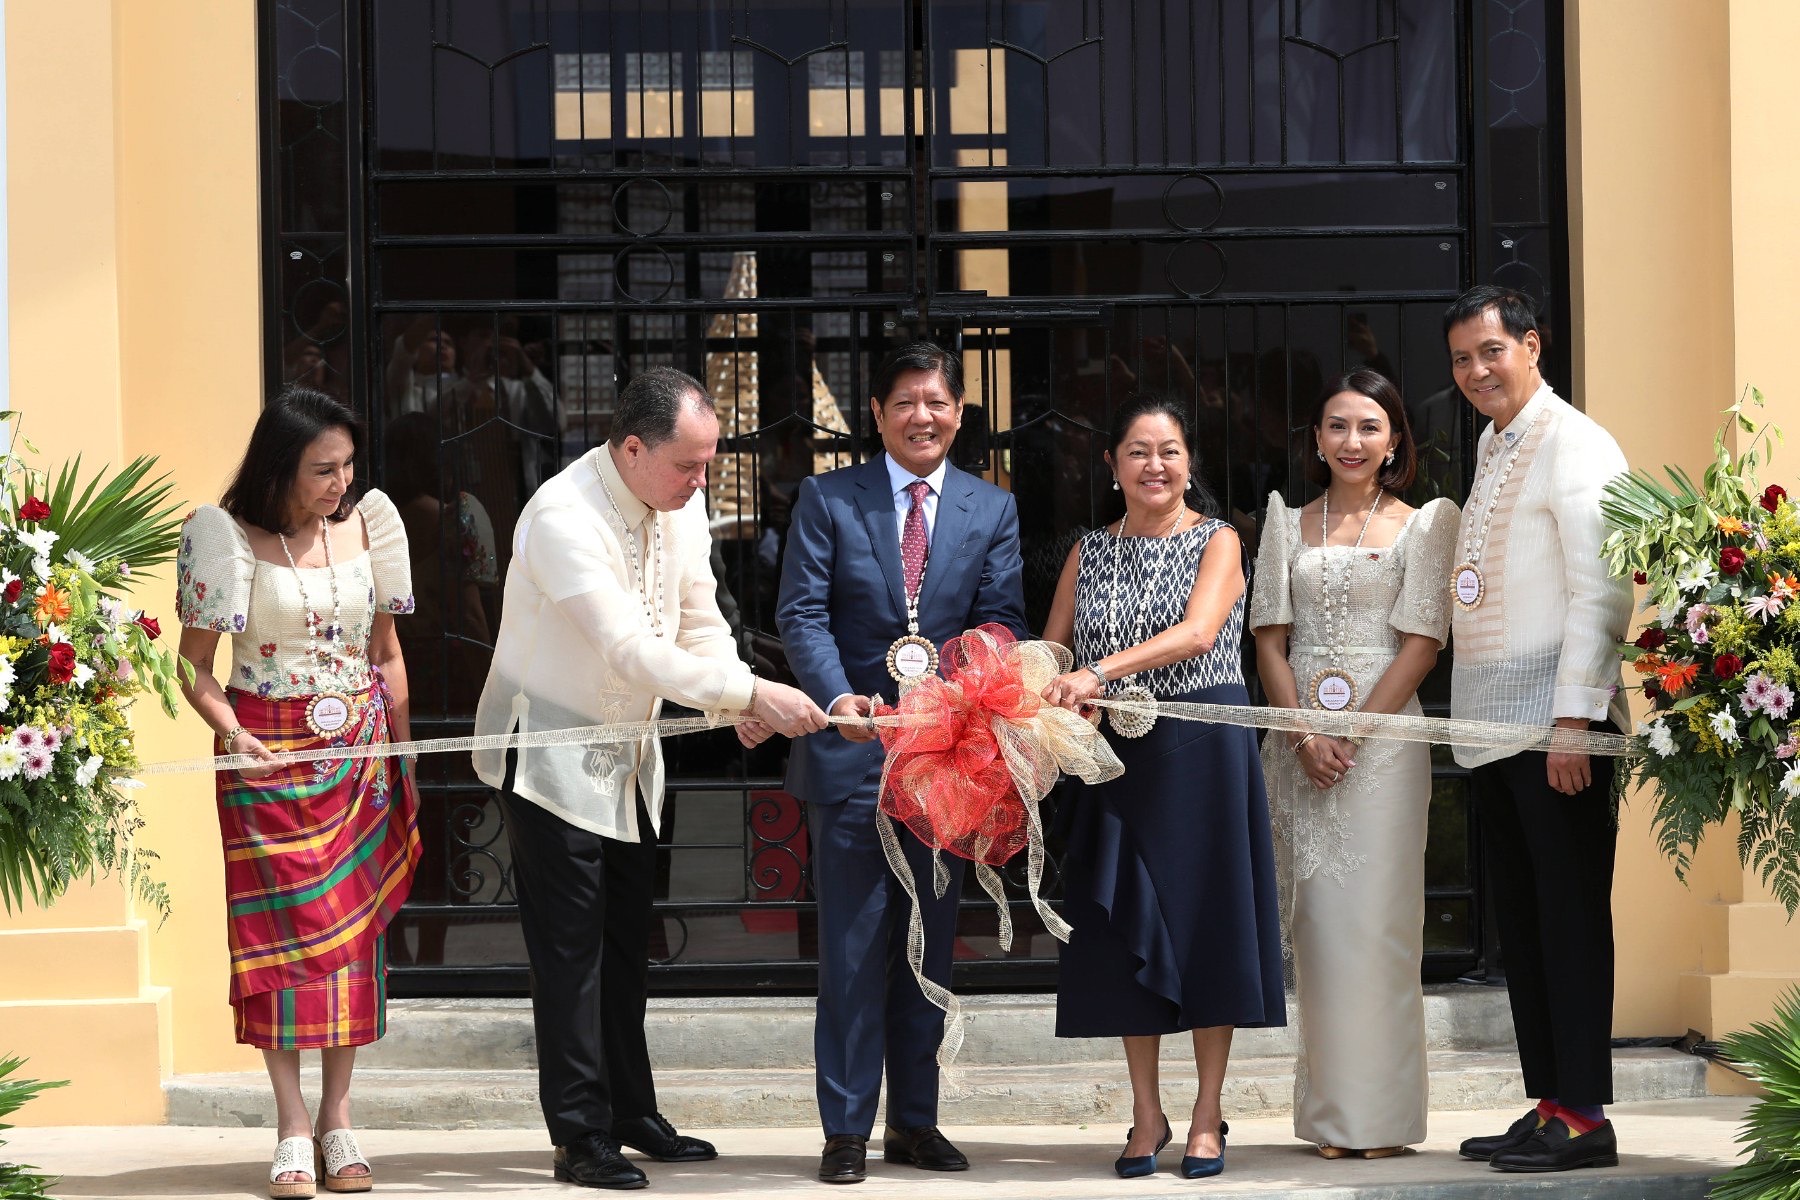 Inauguration of the Central Visayas Regional Museum